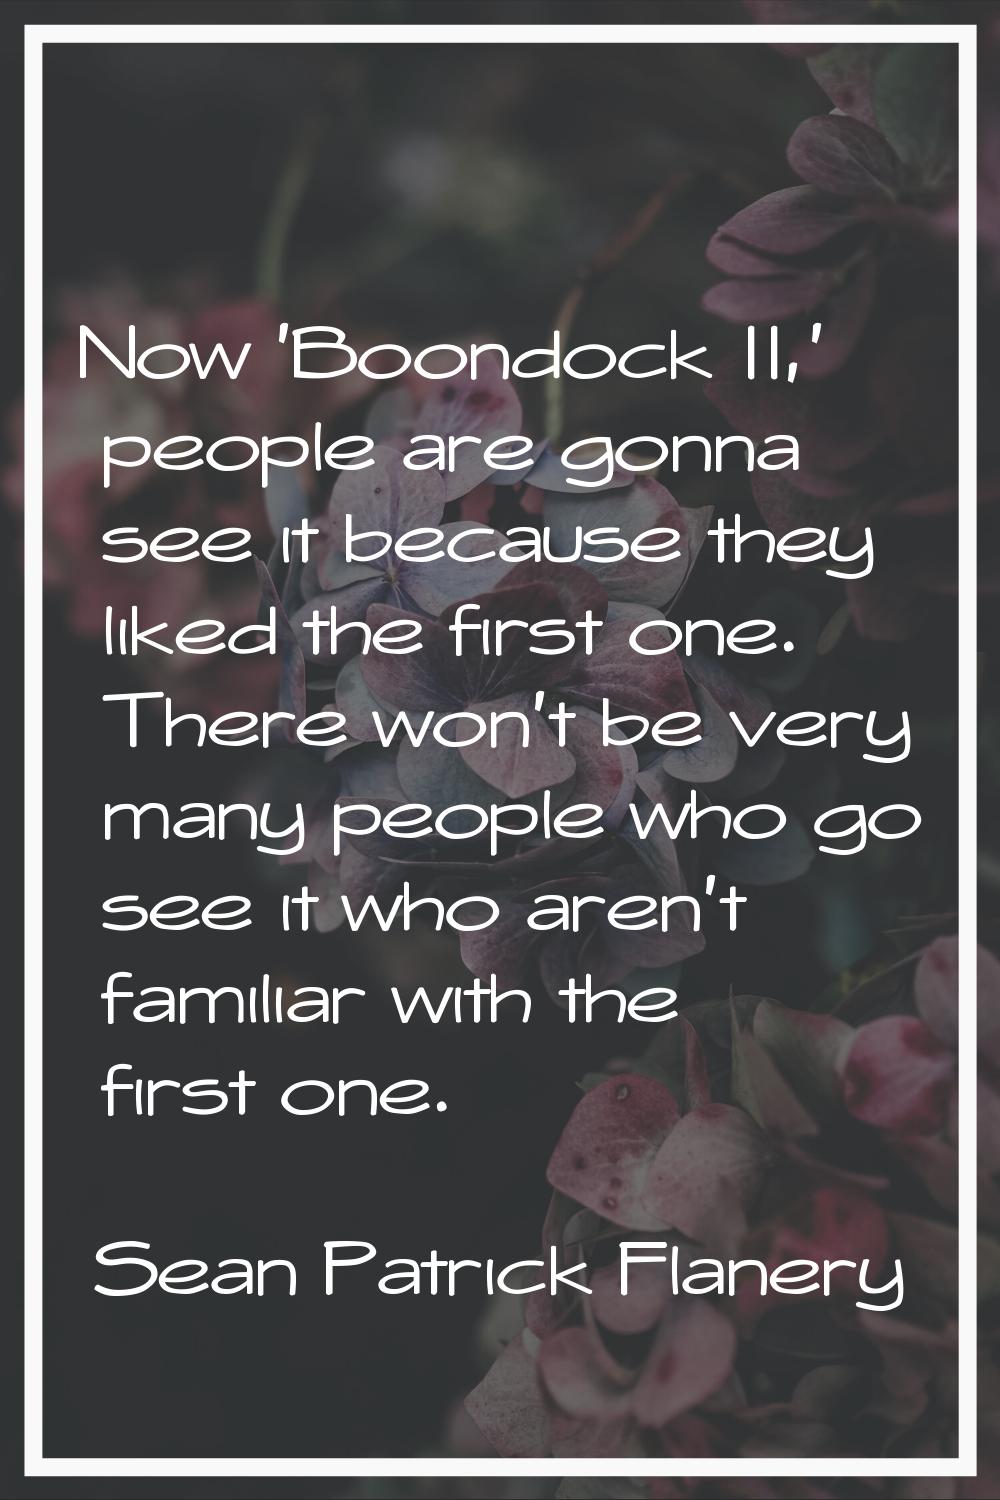 Now 'Boondock II,' people are gonna see it because they liked the first one. There won't be very ma